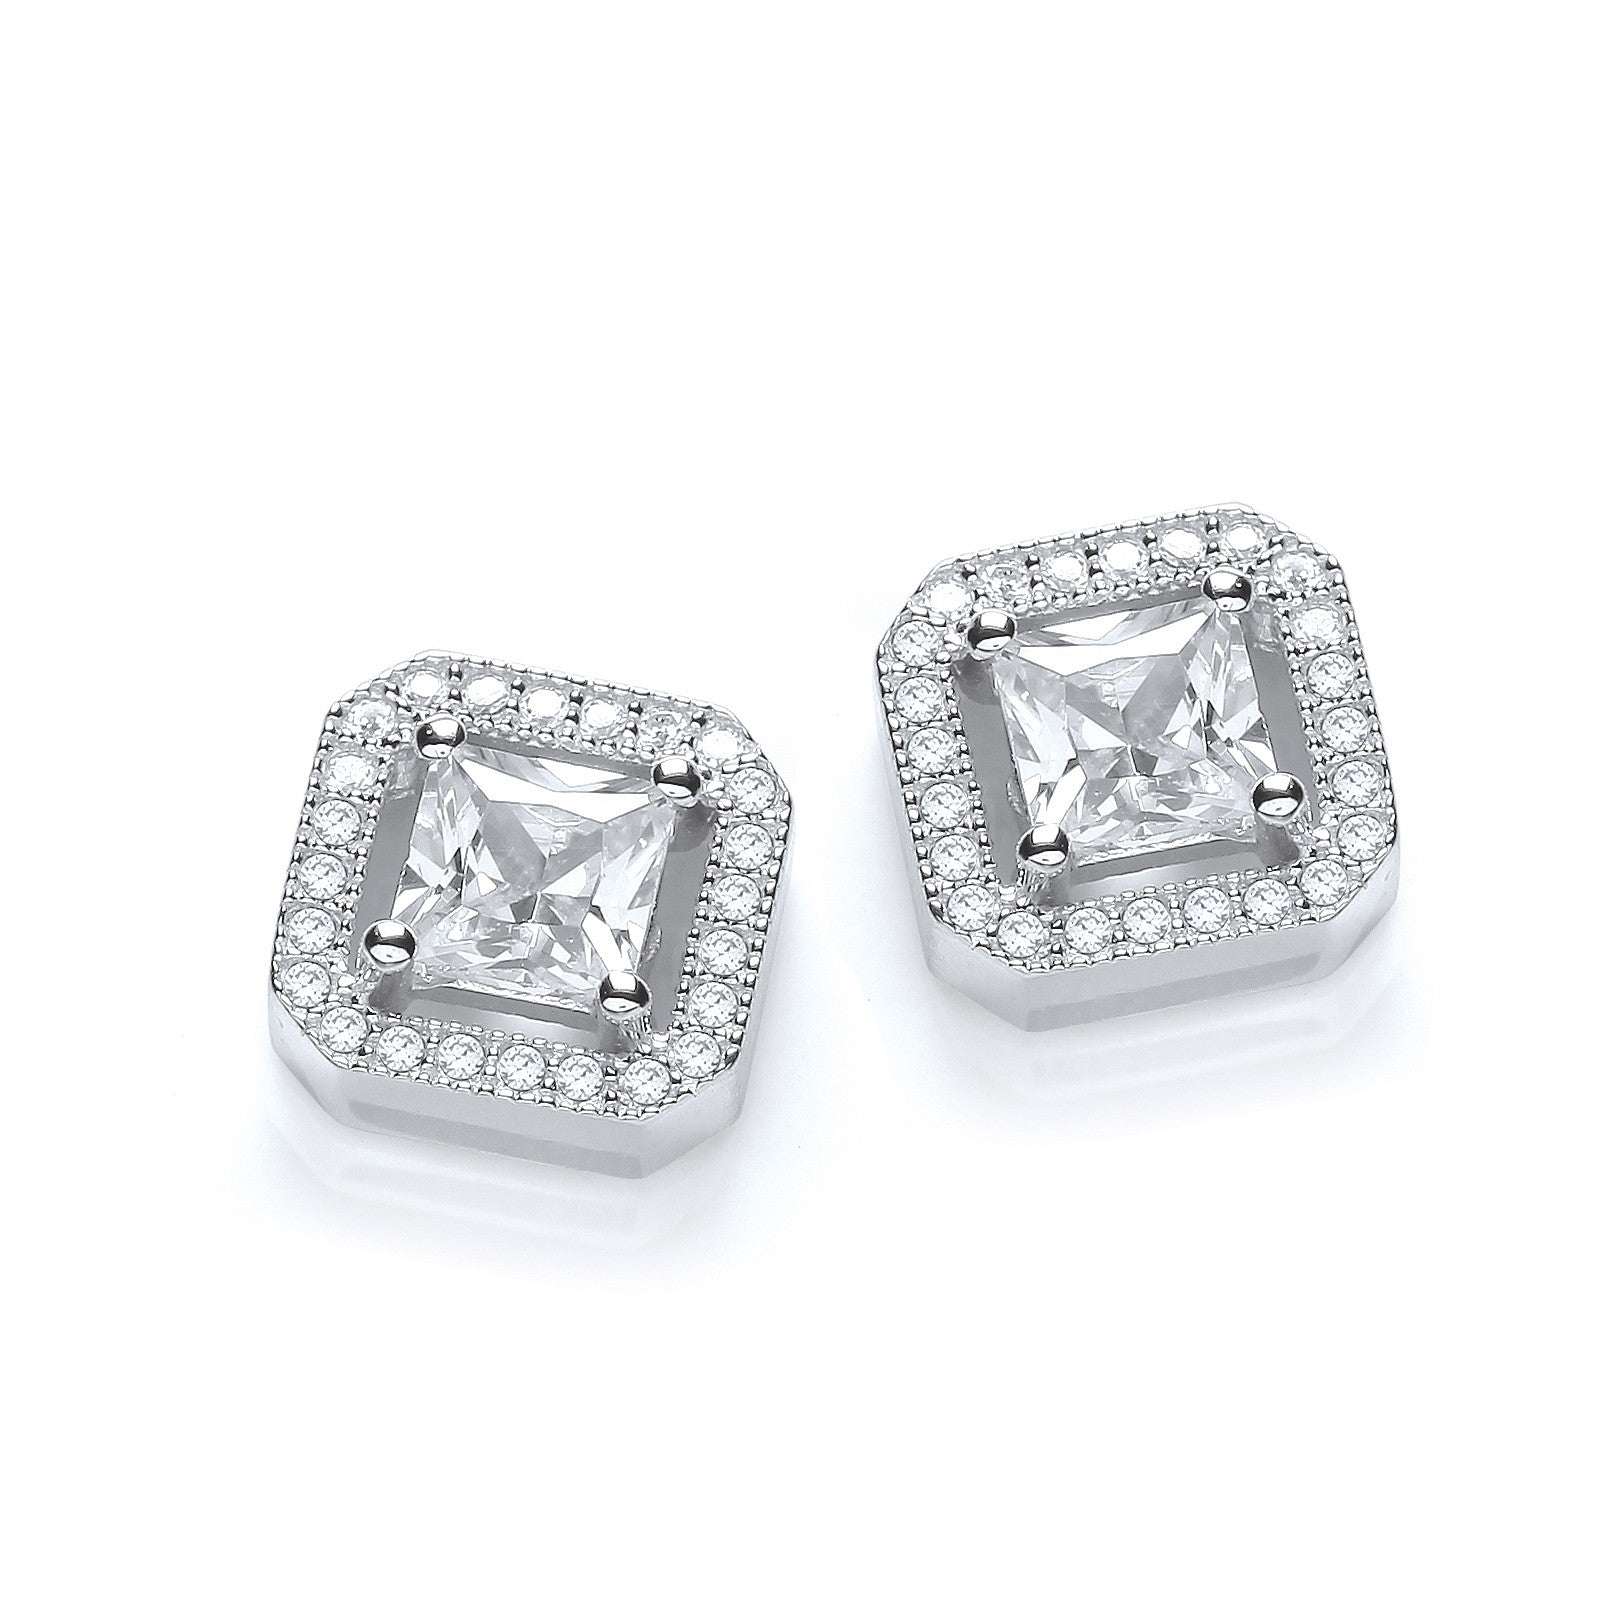 Stud 925 Sterling Silver Square Earrings Set With CZs - FJewellery